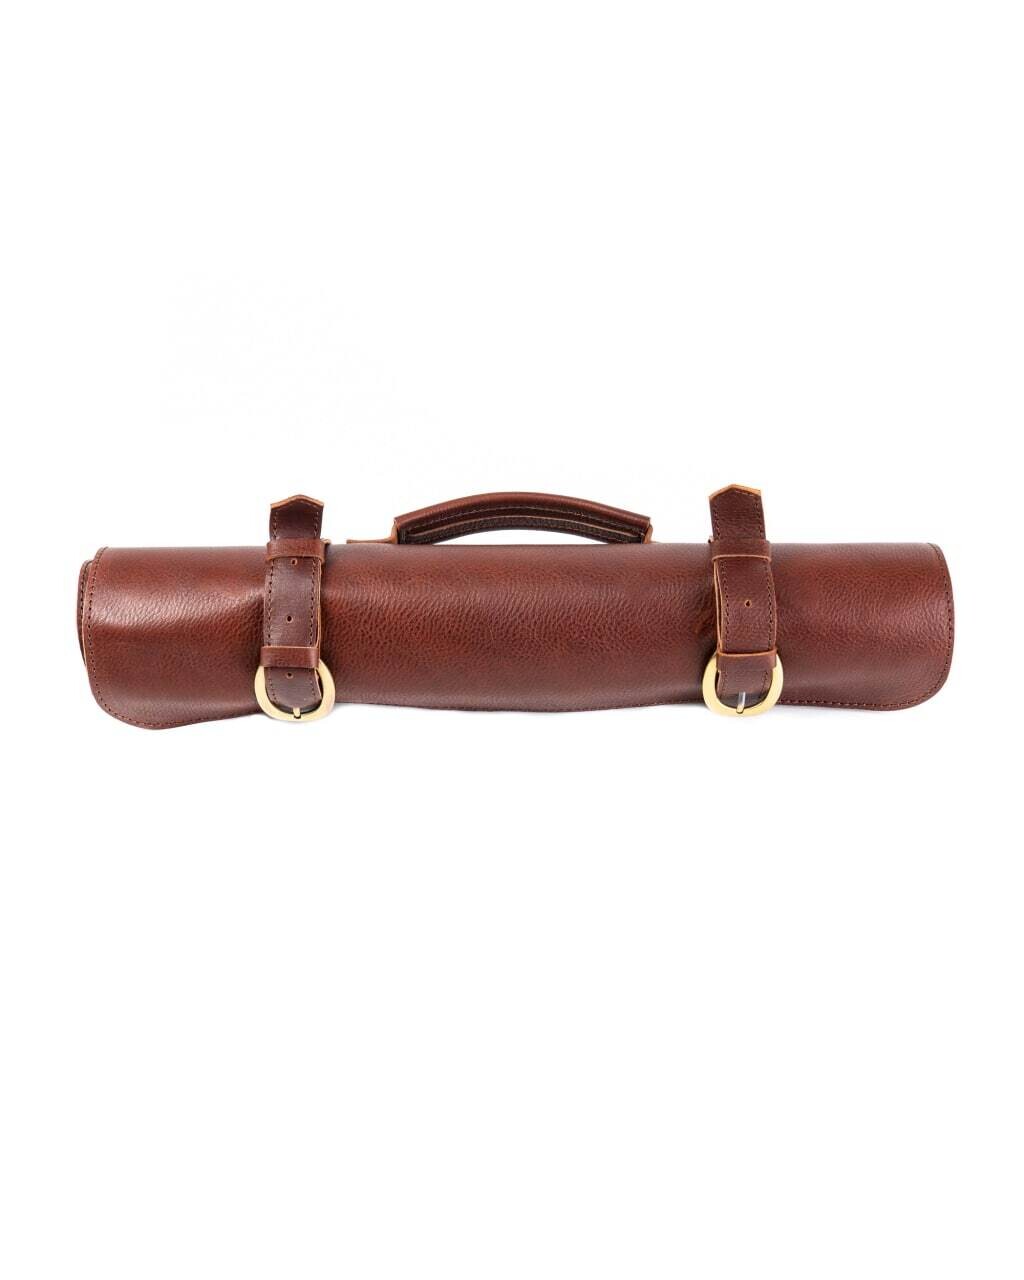 ROLL-LR355 - LEATHER BAG SCREW FOR KNIVES